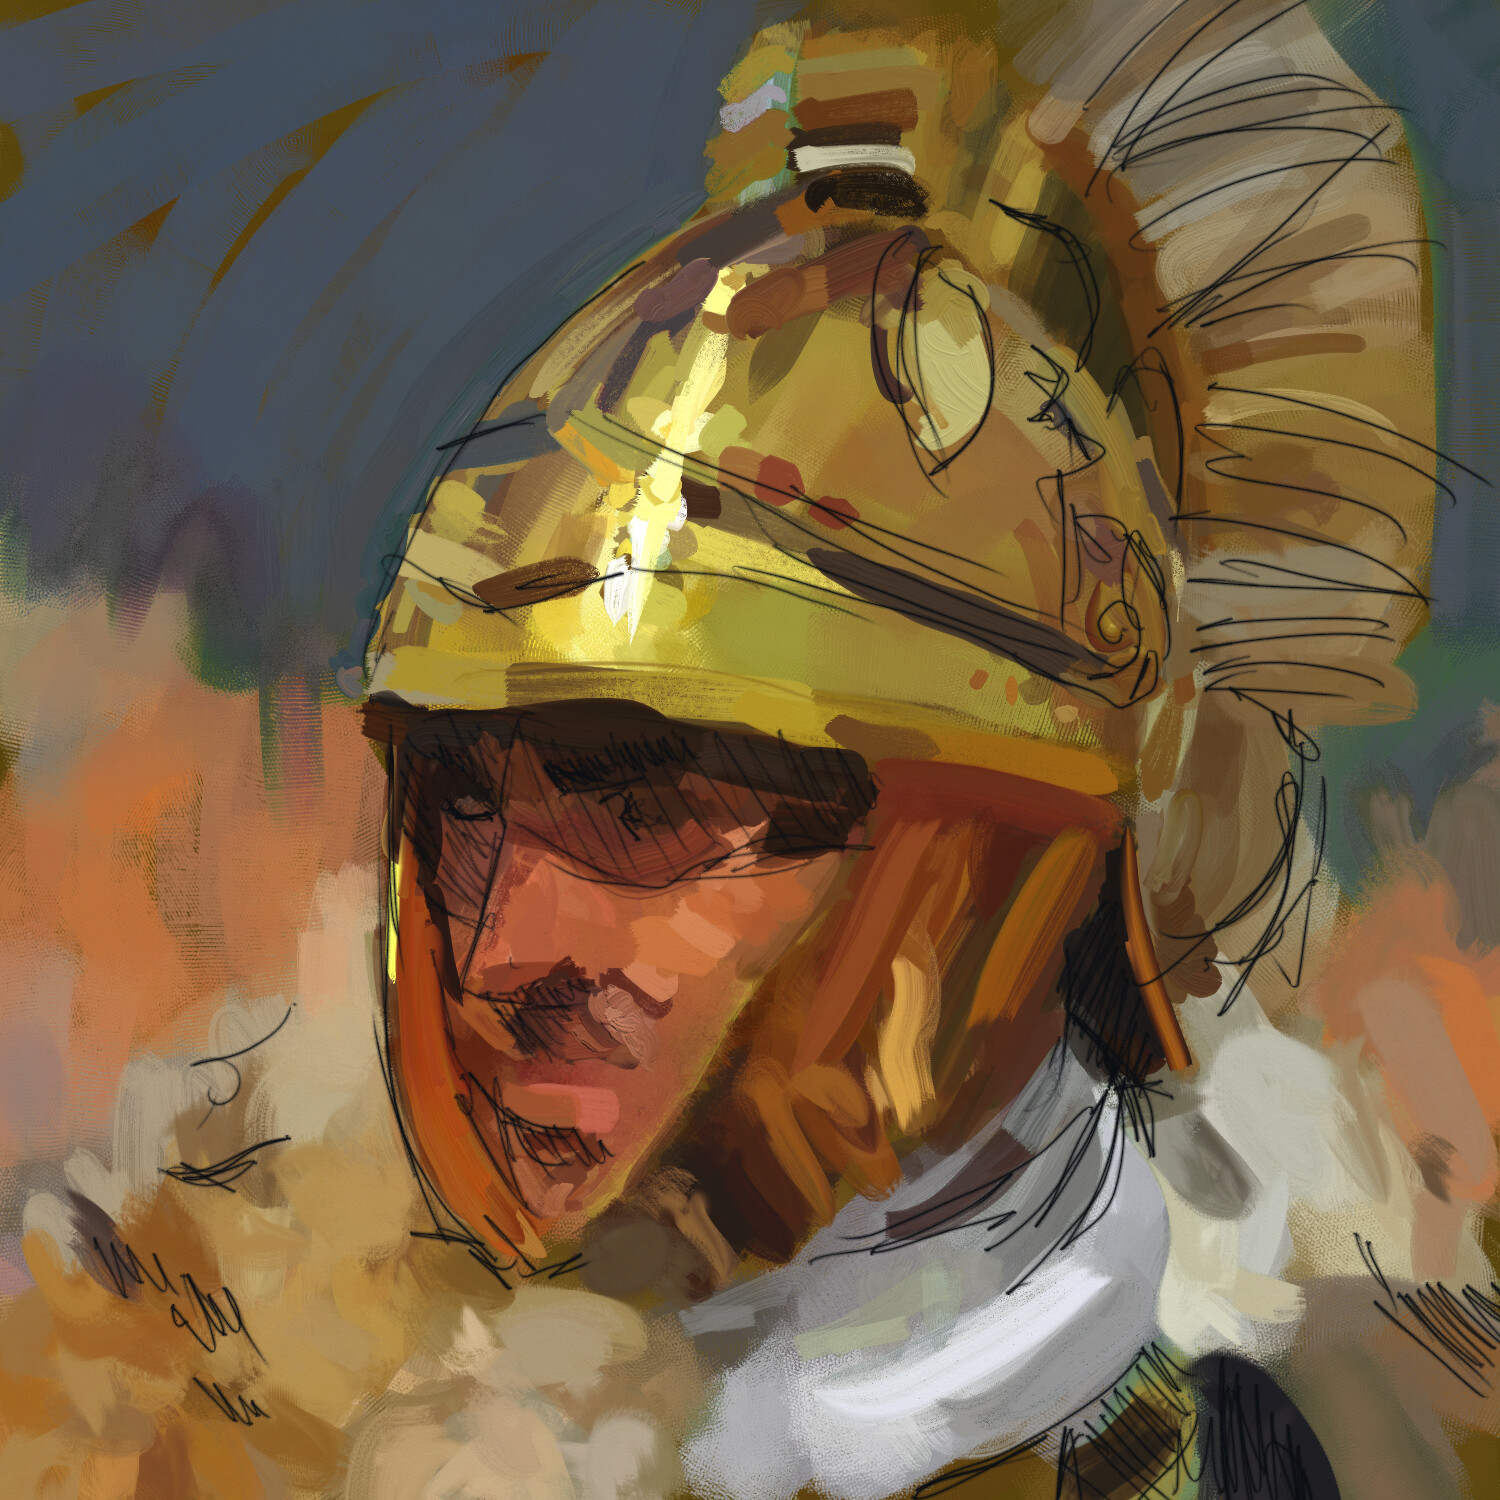 Start refining shapes, focusing on brush stroke direction to match form or draw interest